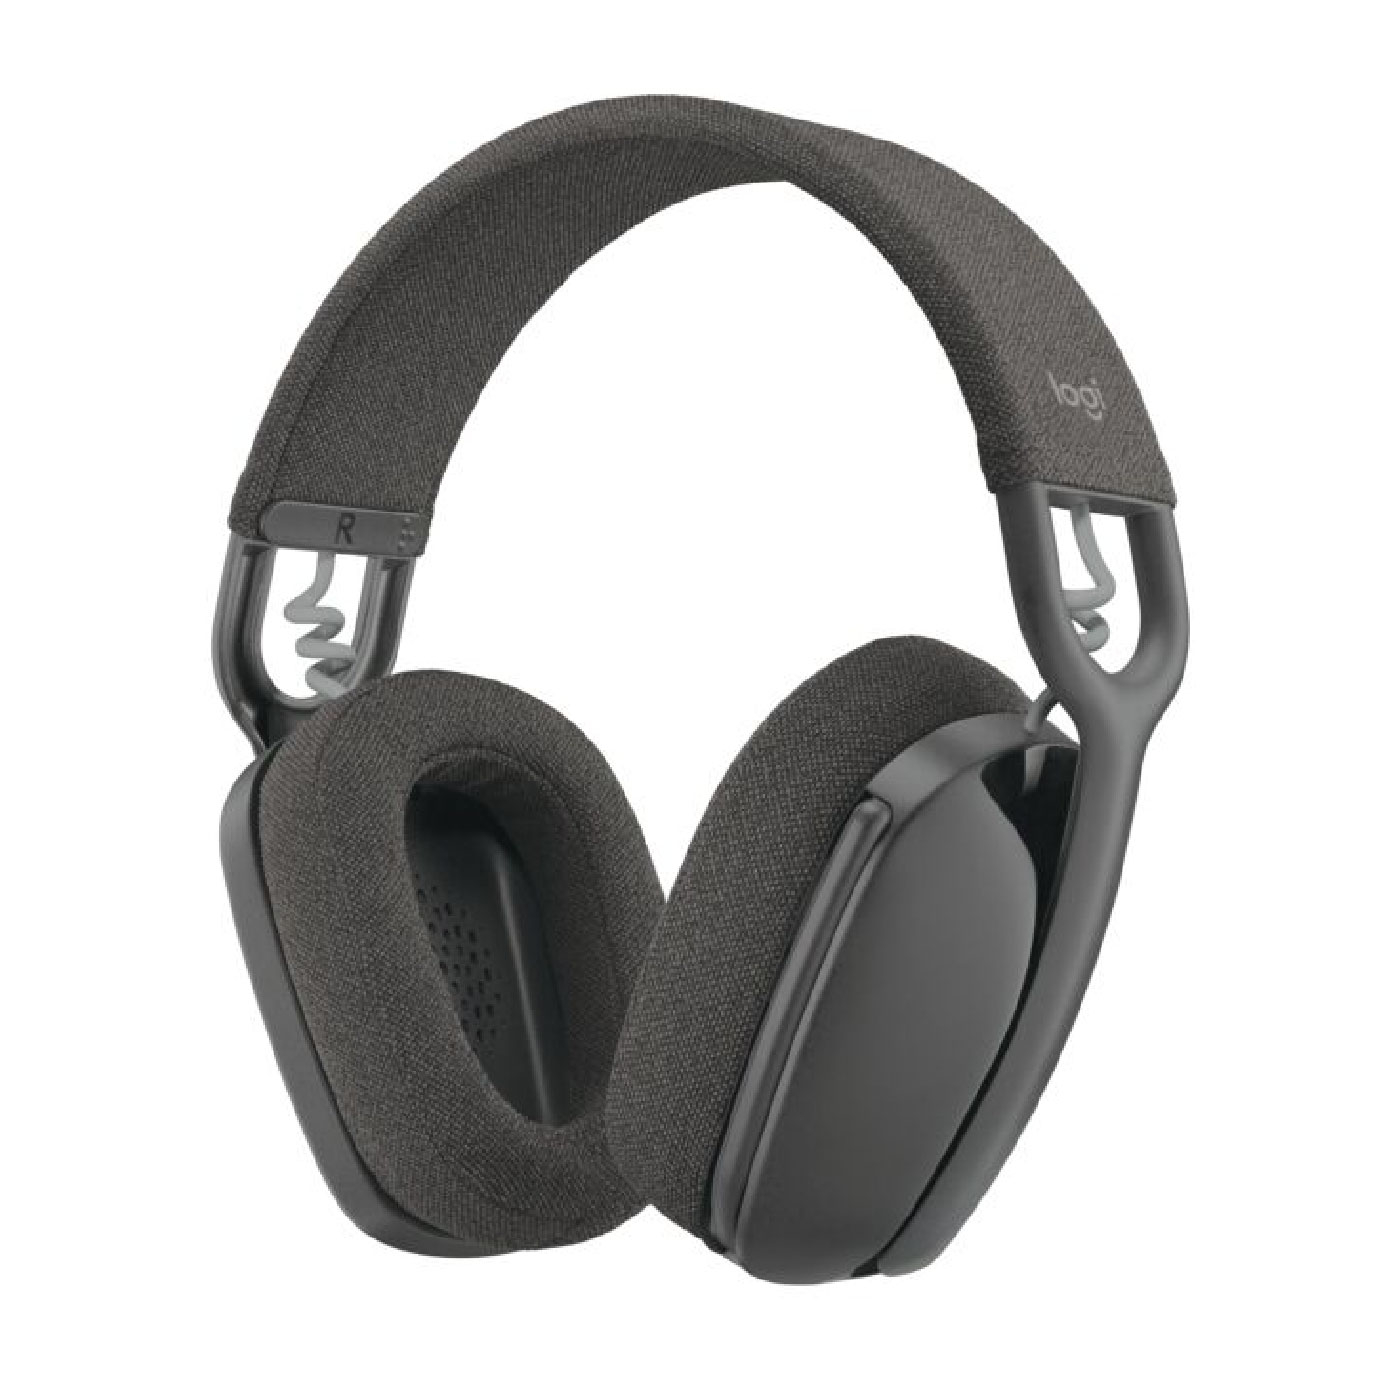 Logitech Zone Vibe 125 Wireless Headphones with Noise-Canceling Microphone, Bluetooth, USB-A Receiver; Works with Zoom, Google Voice/Meet, Mac/PC - Graphite 